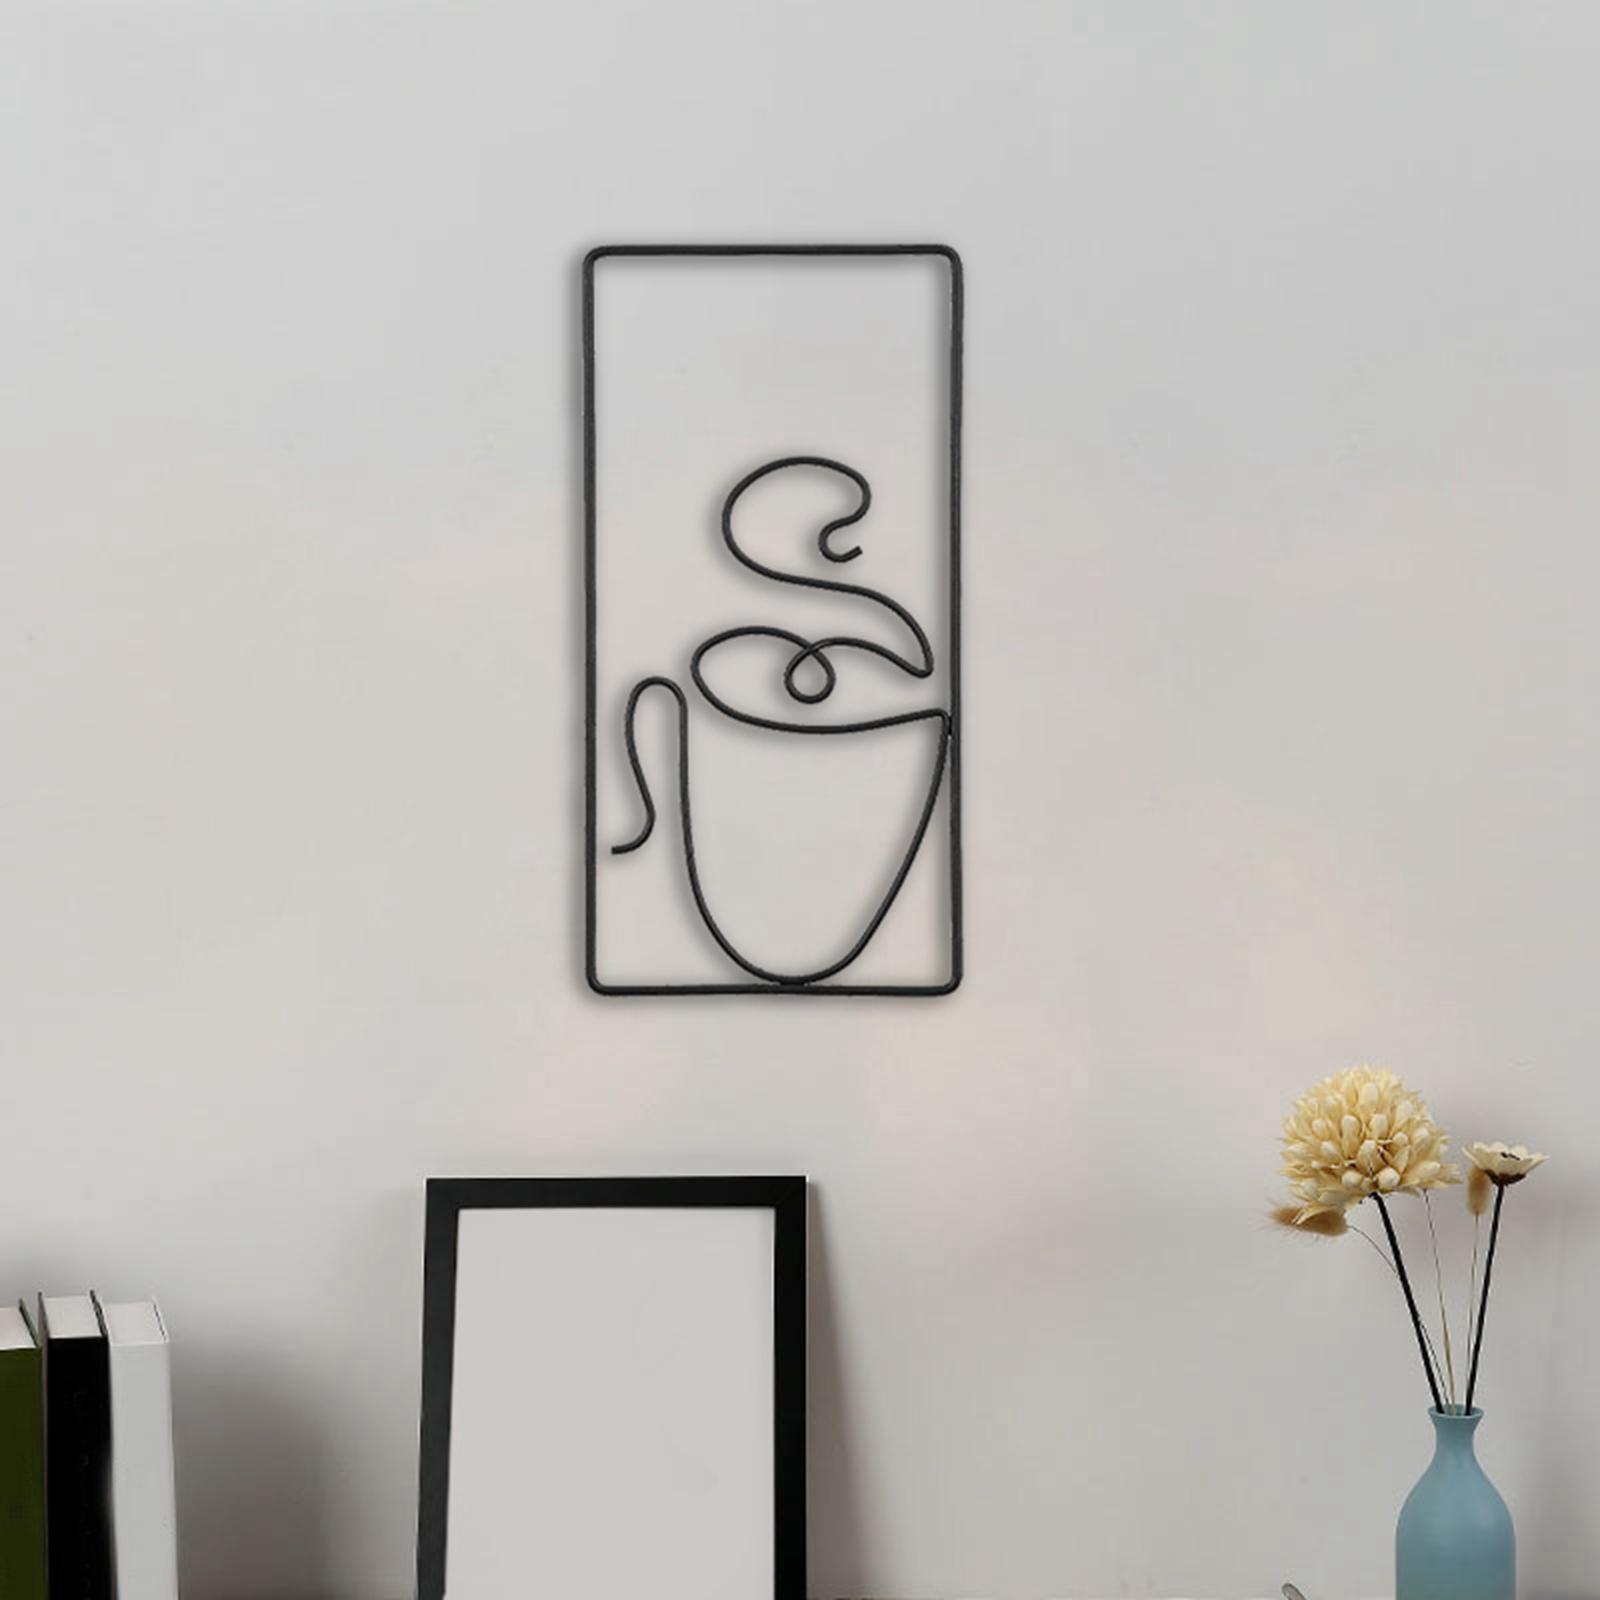 Modern Metal Wall Art Decors Line Wall Sculptures for Office Bedroom style D